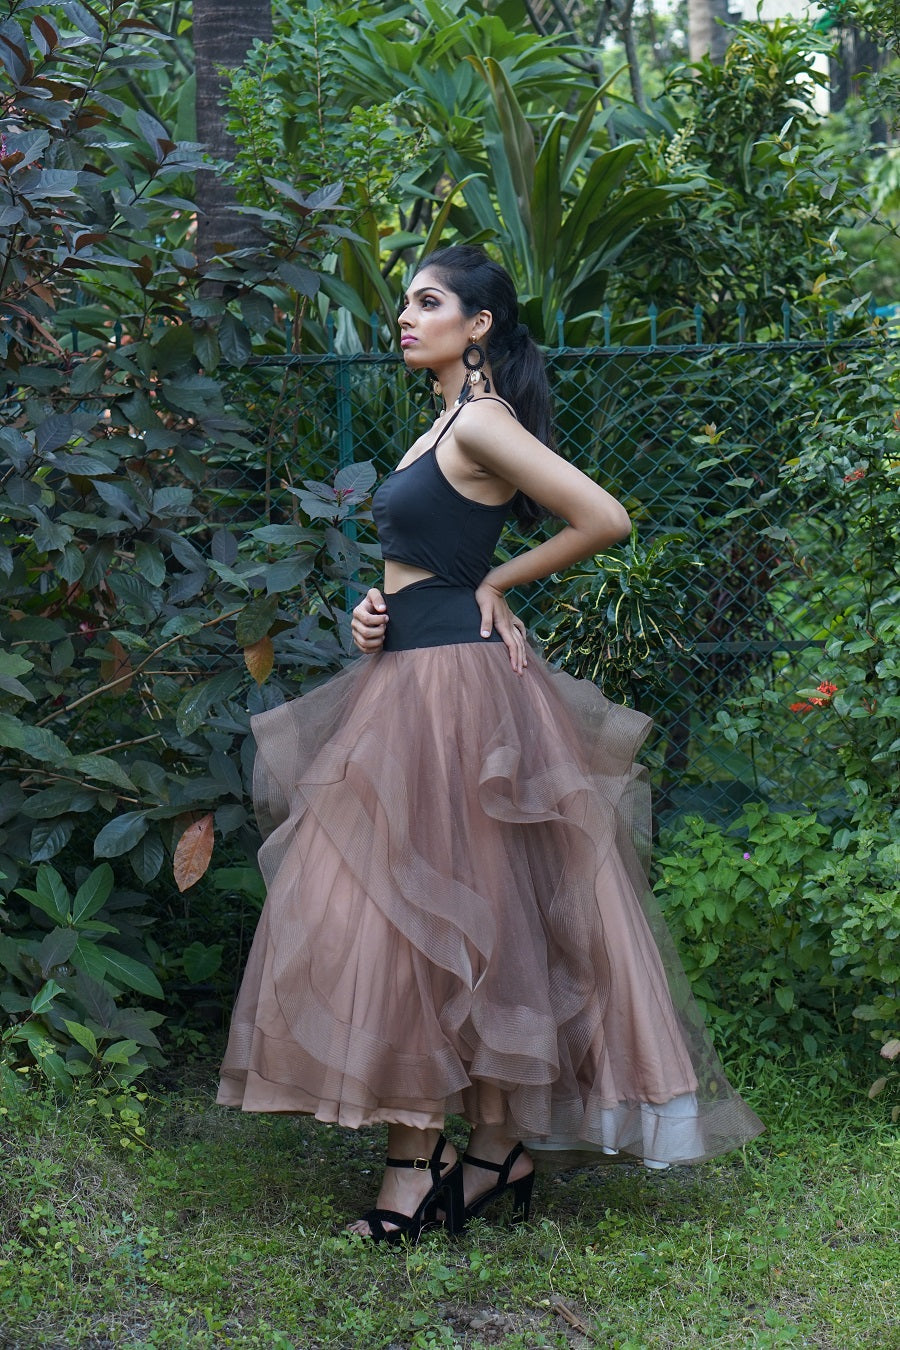 TCR Brown Tulle Layered Skirt With Black Bodysuit!